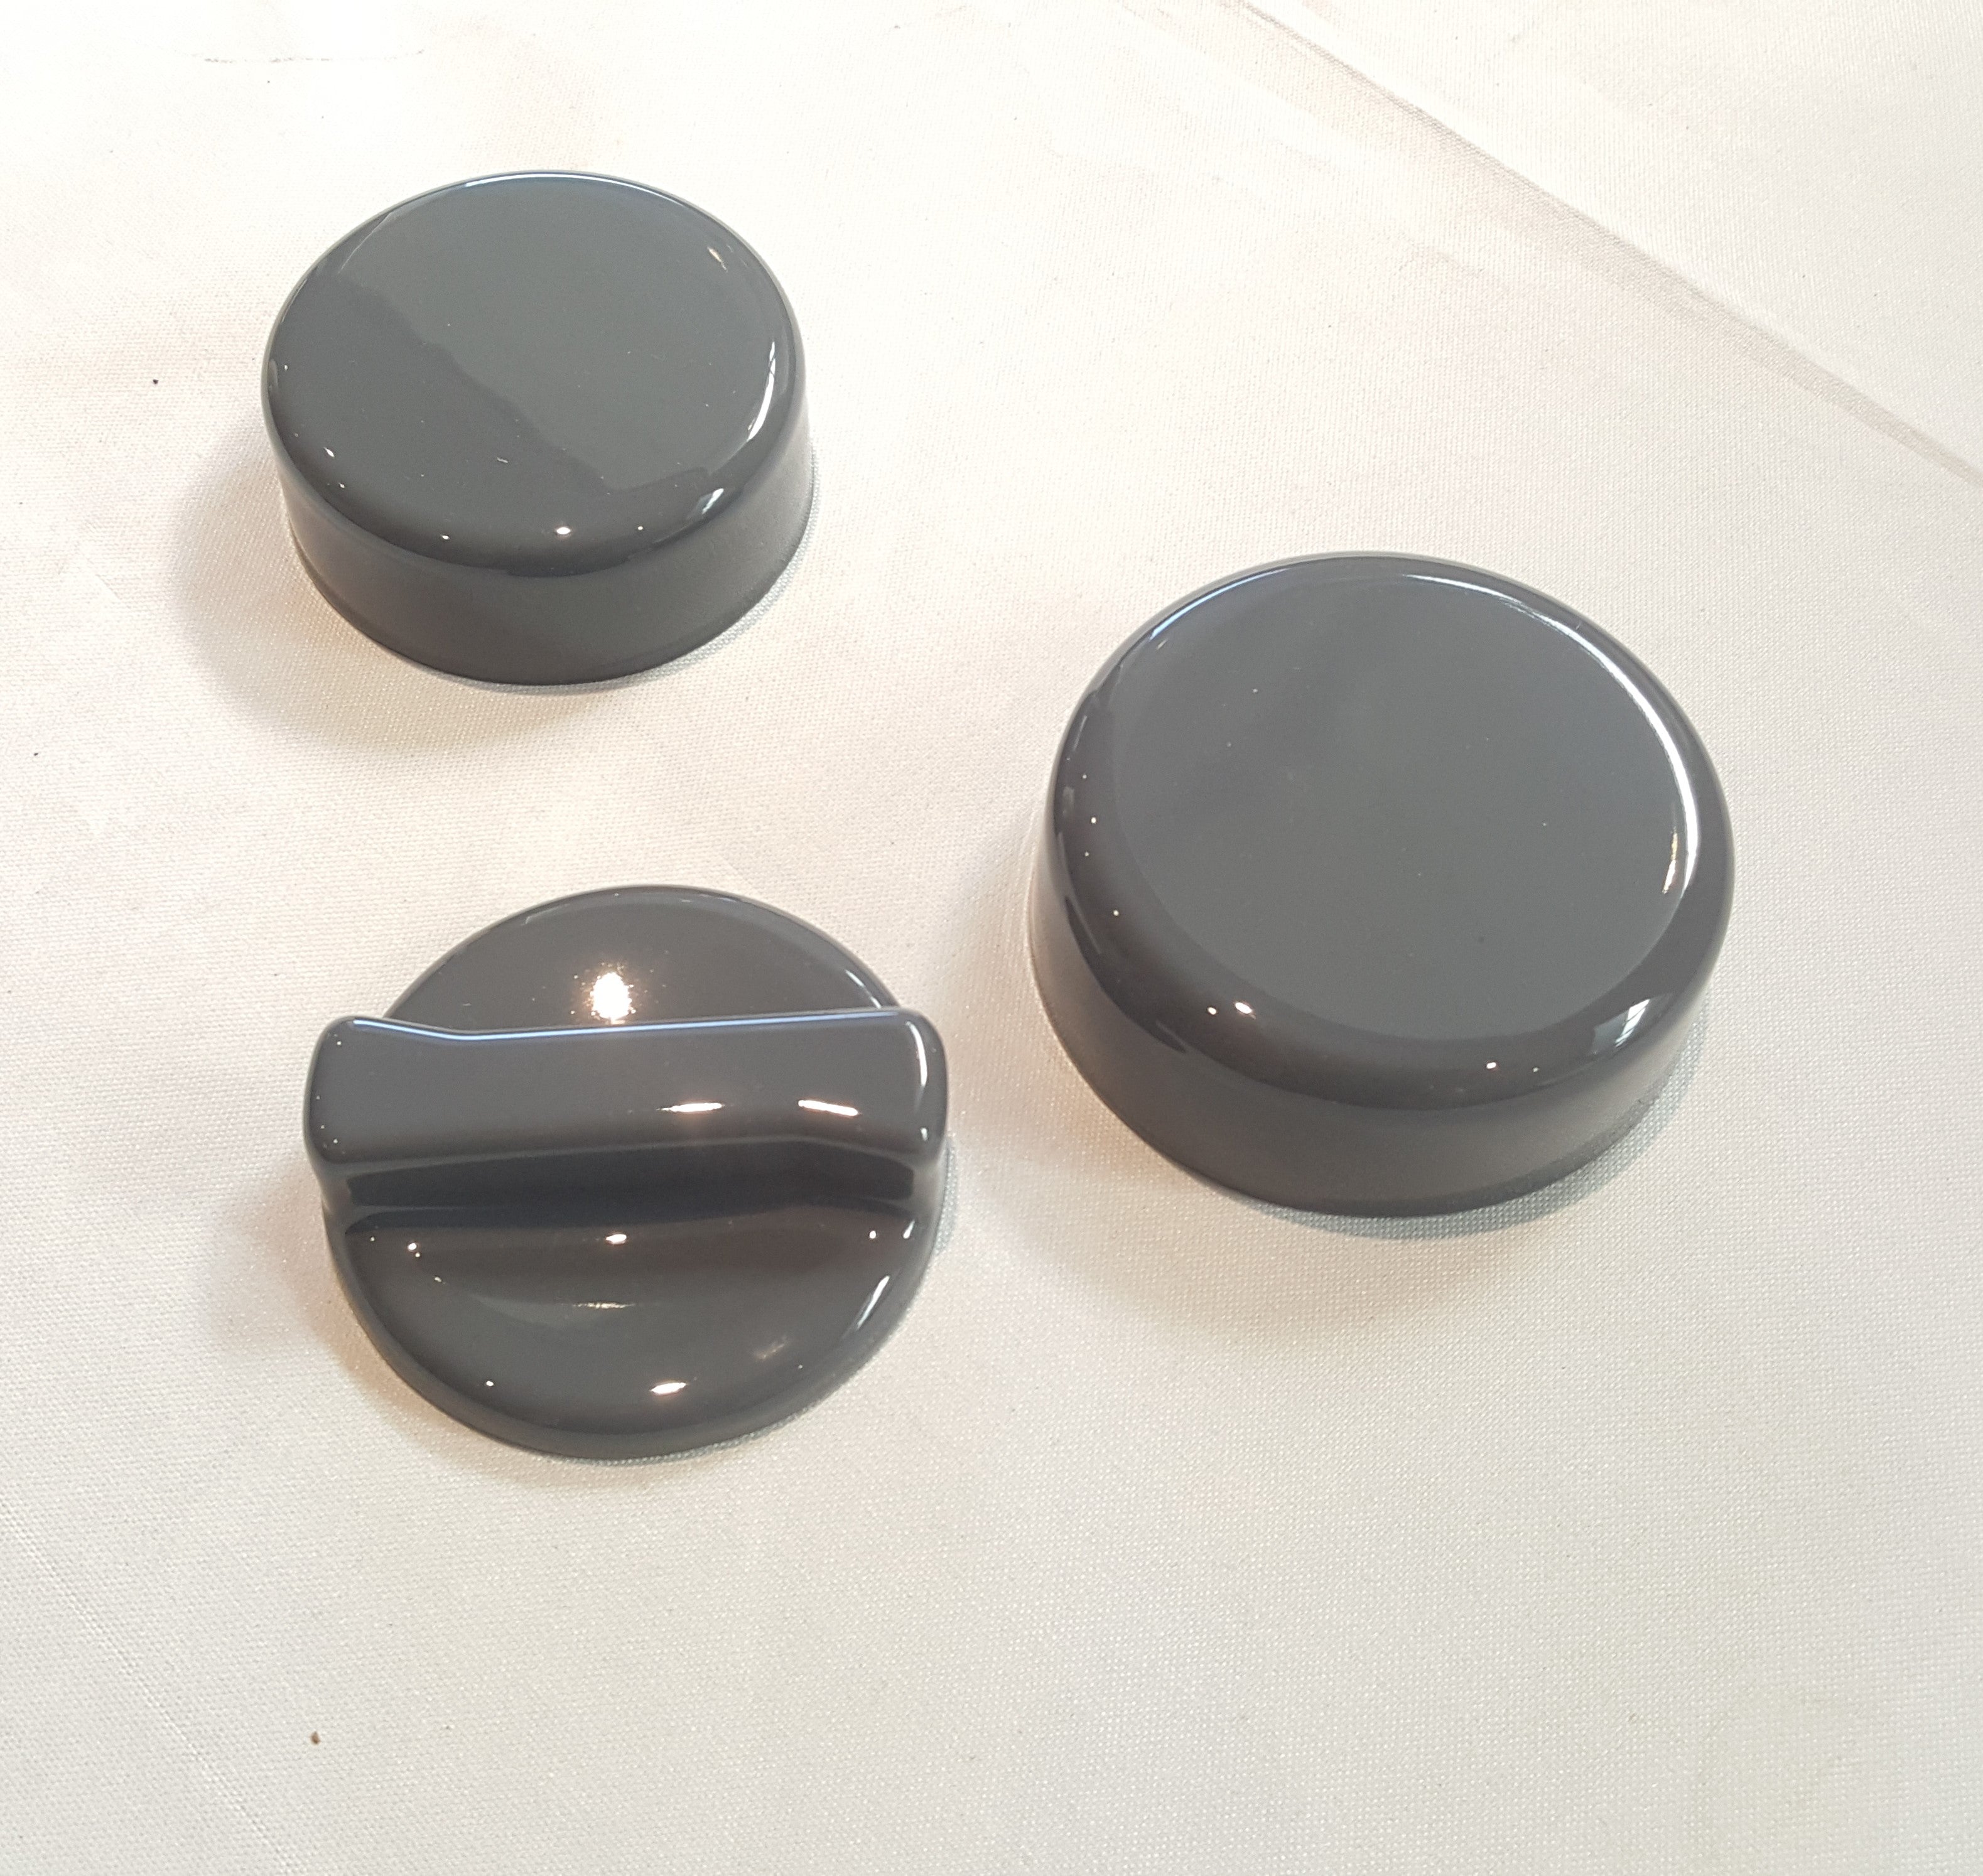 Proform Engine Cap Cover Kit - Mk2/3/4 Focus / Mk 6/7/8 Fiesta (Painted Finishes)